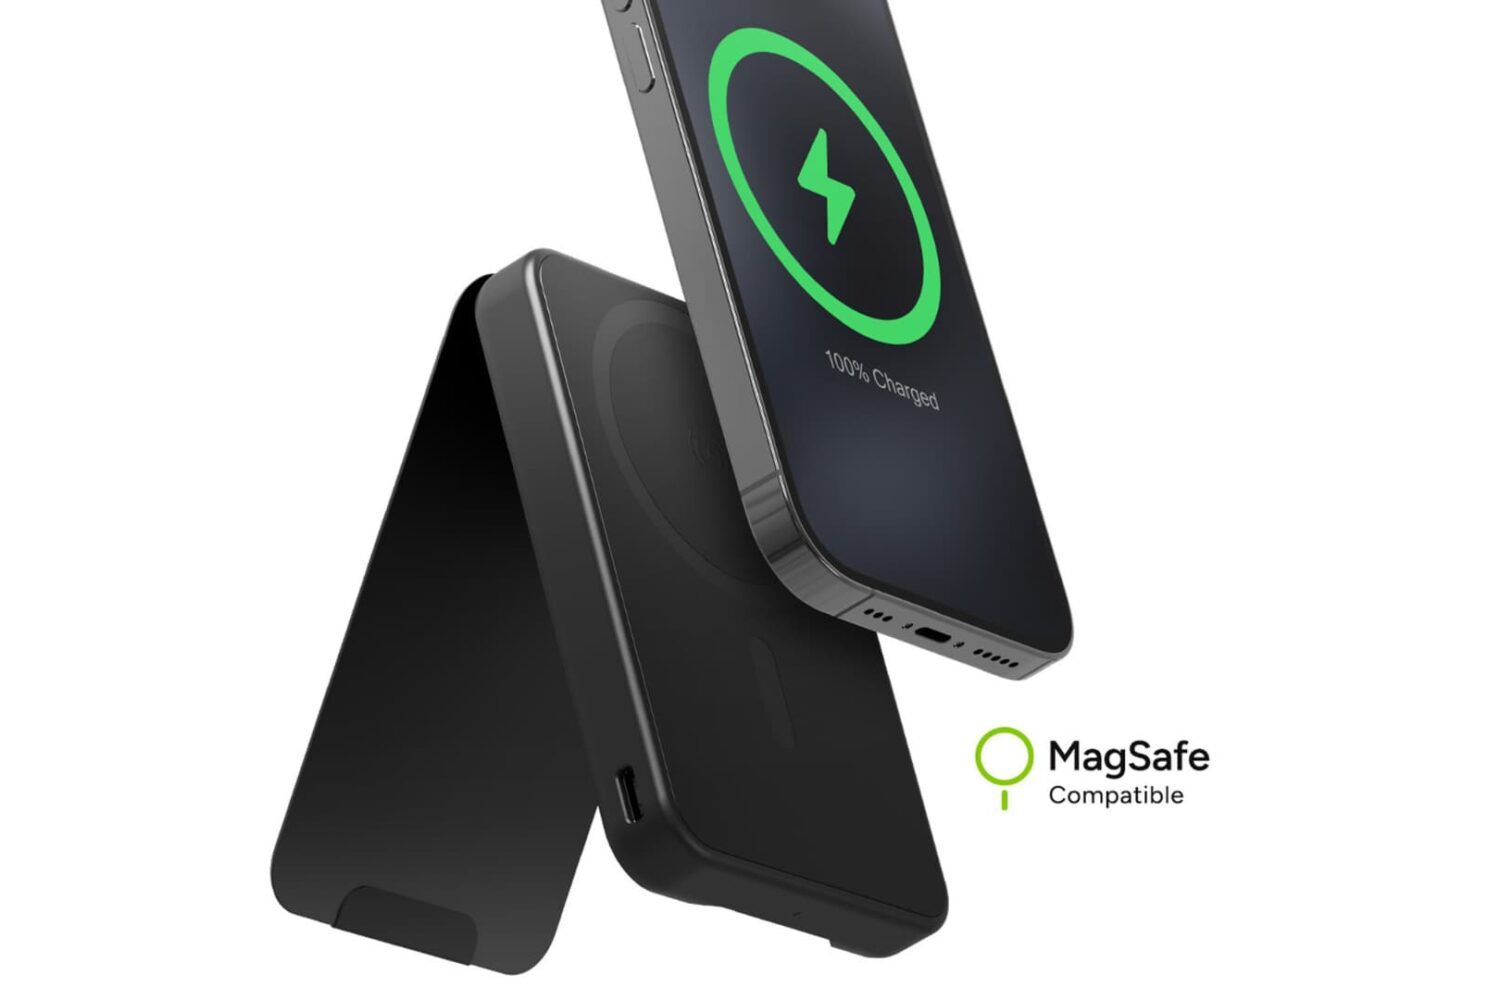 mophie snap+ juice pack mini with stand and iPhone in frame.